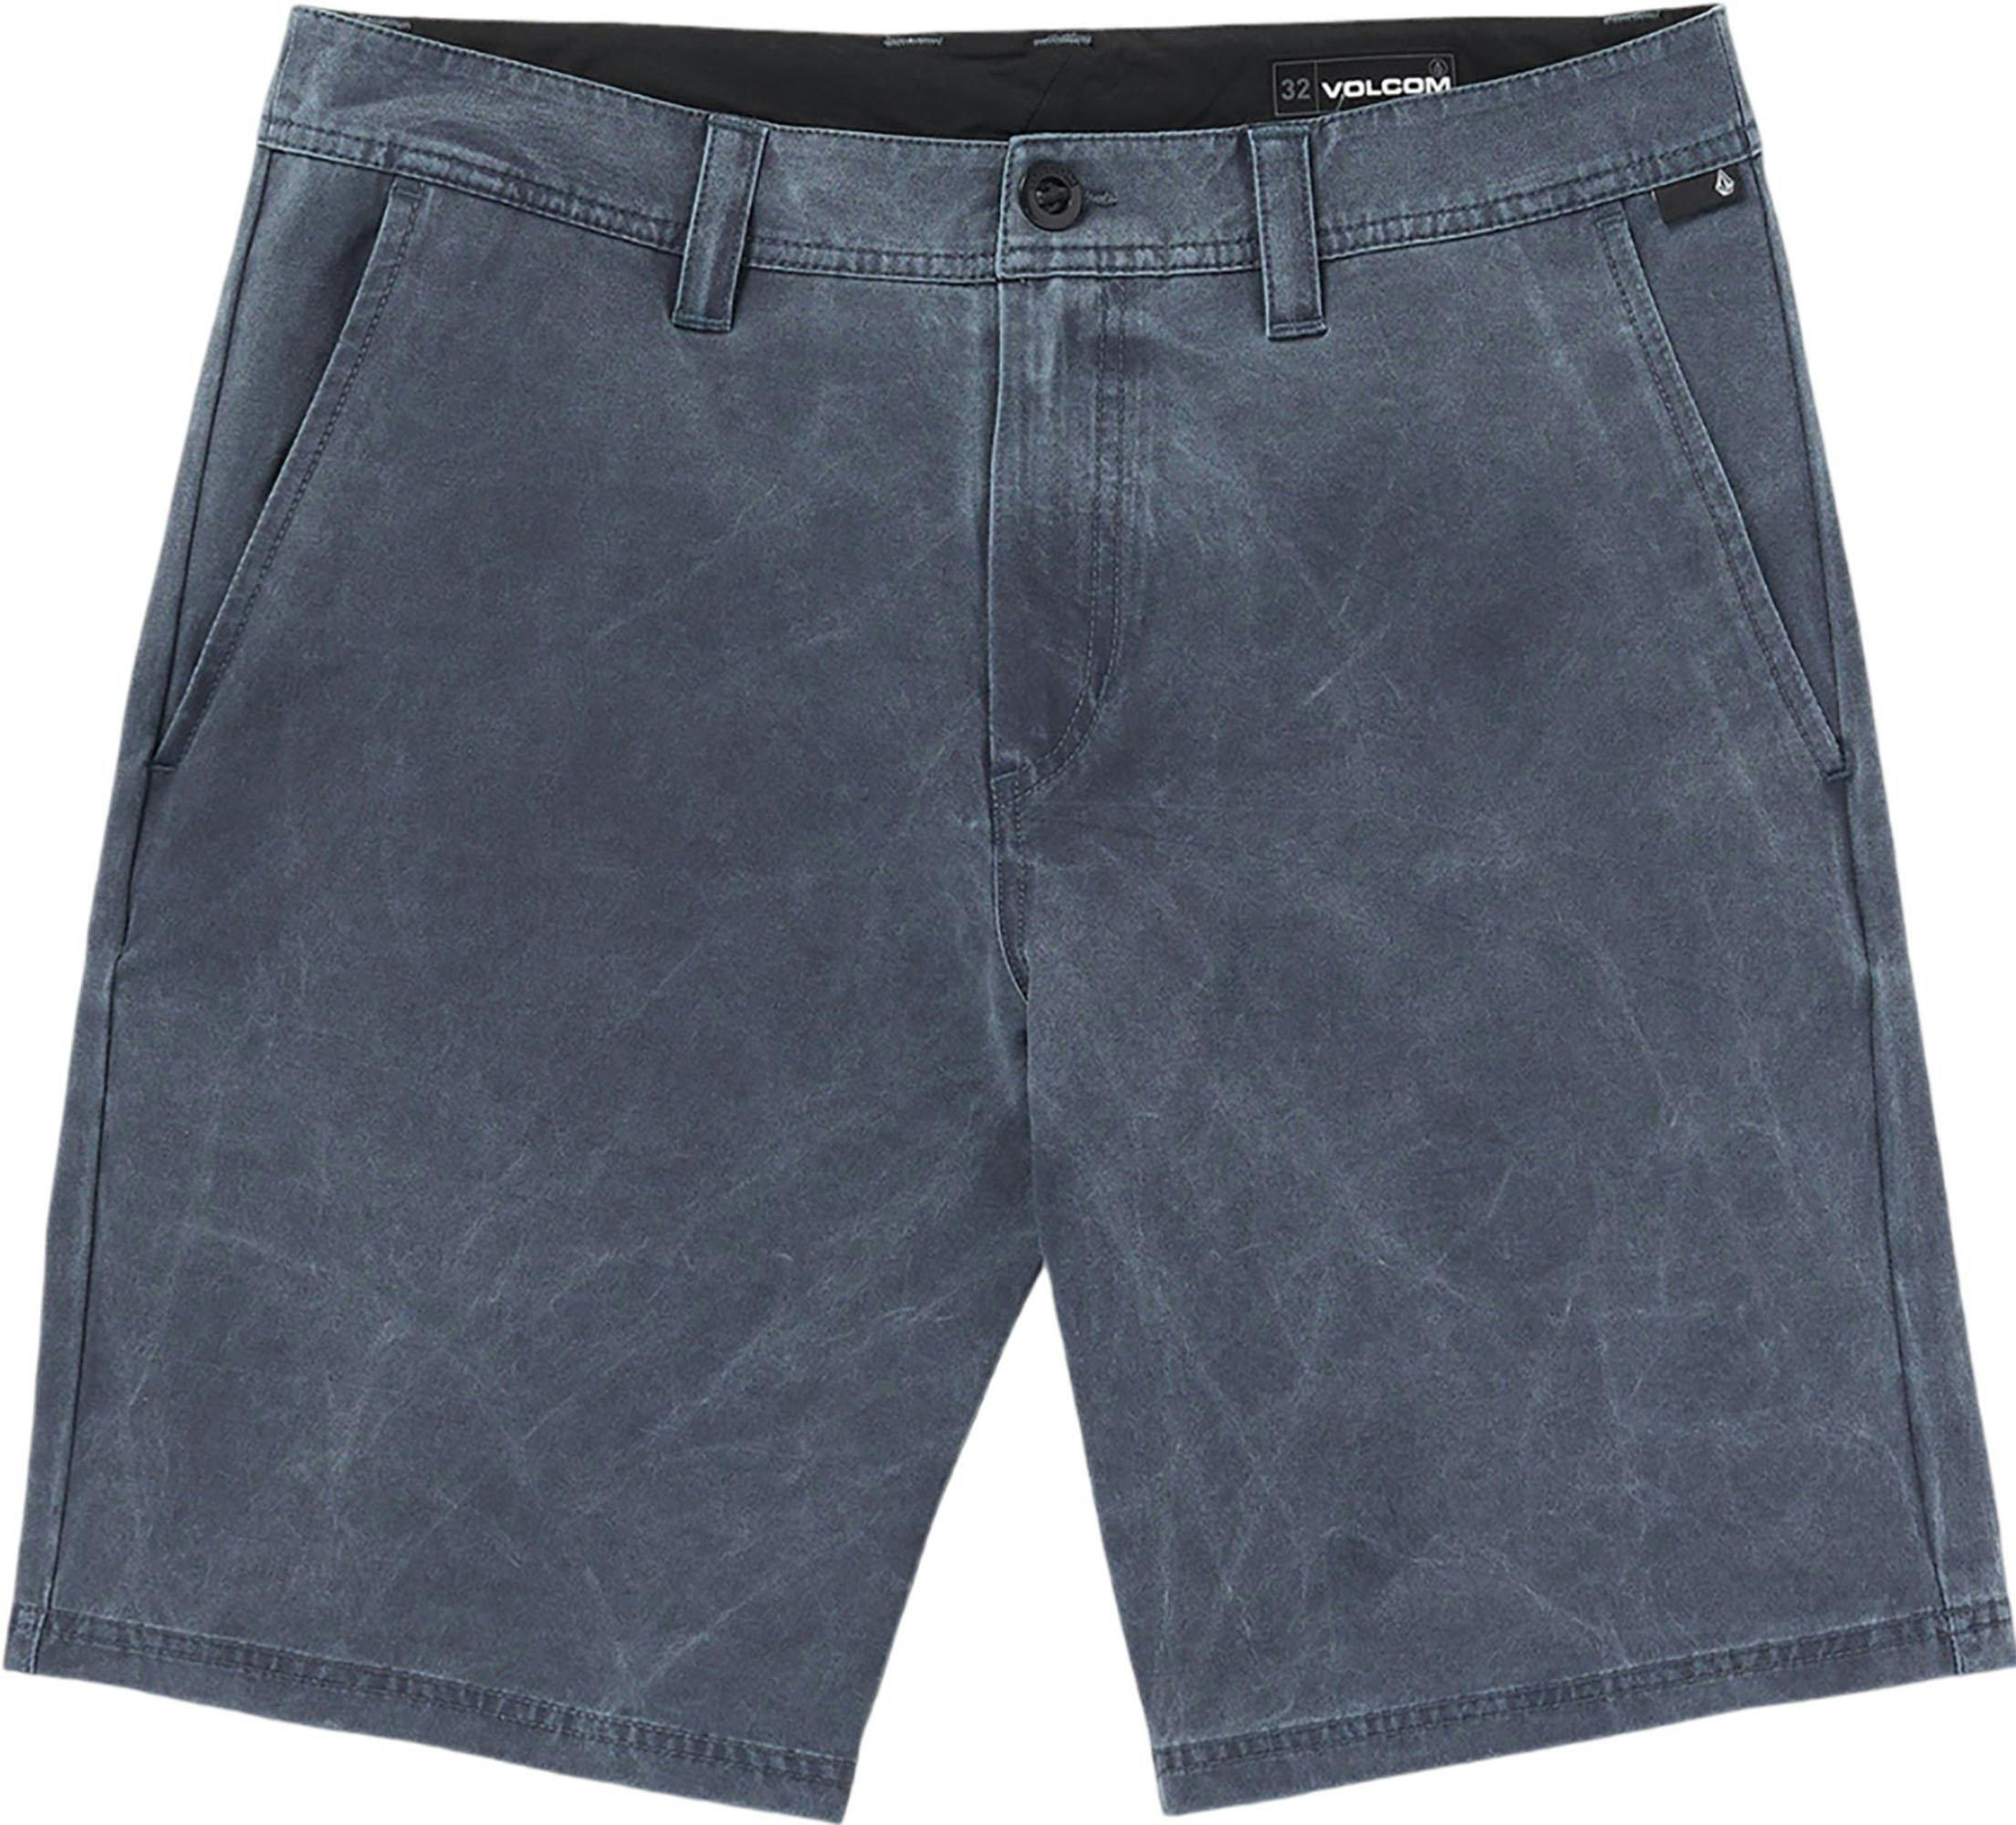 Product image for Stone Faded Hybrid Short 19" - Men's